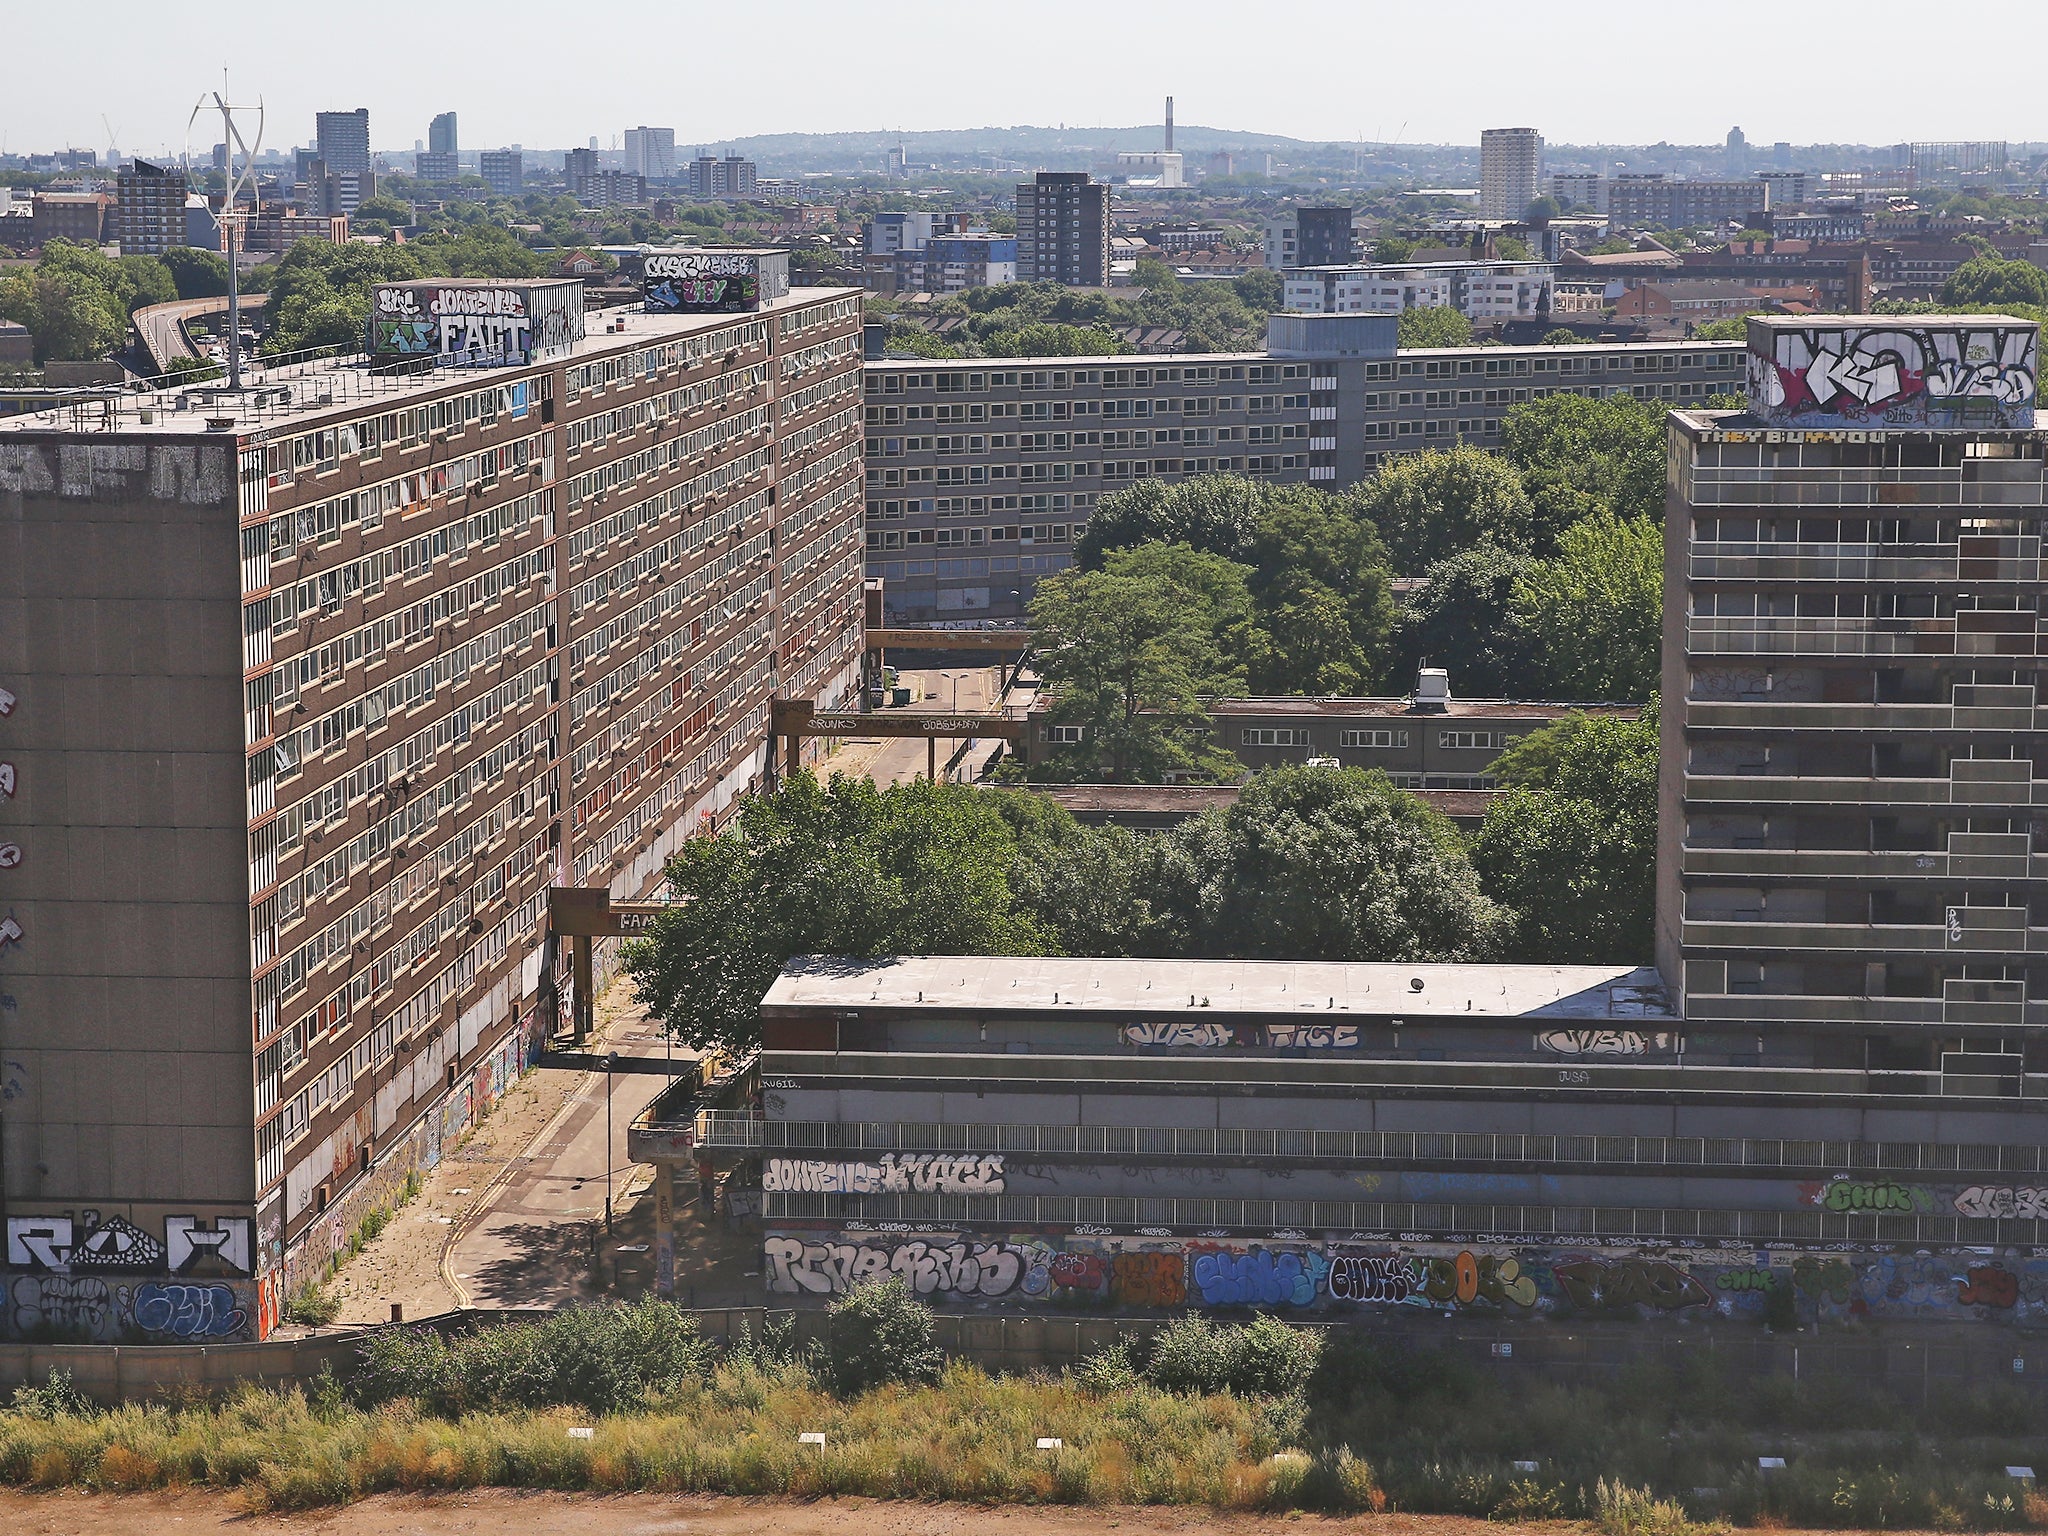 The Heygate Estate in 2013